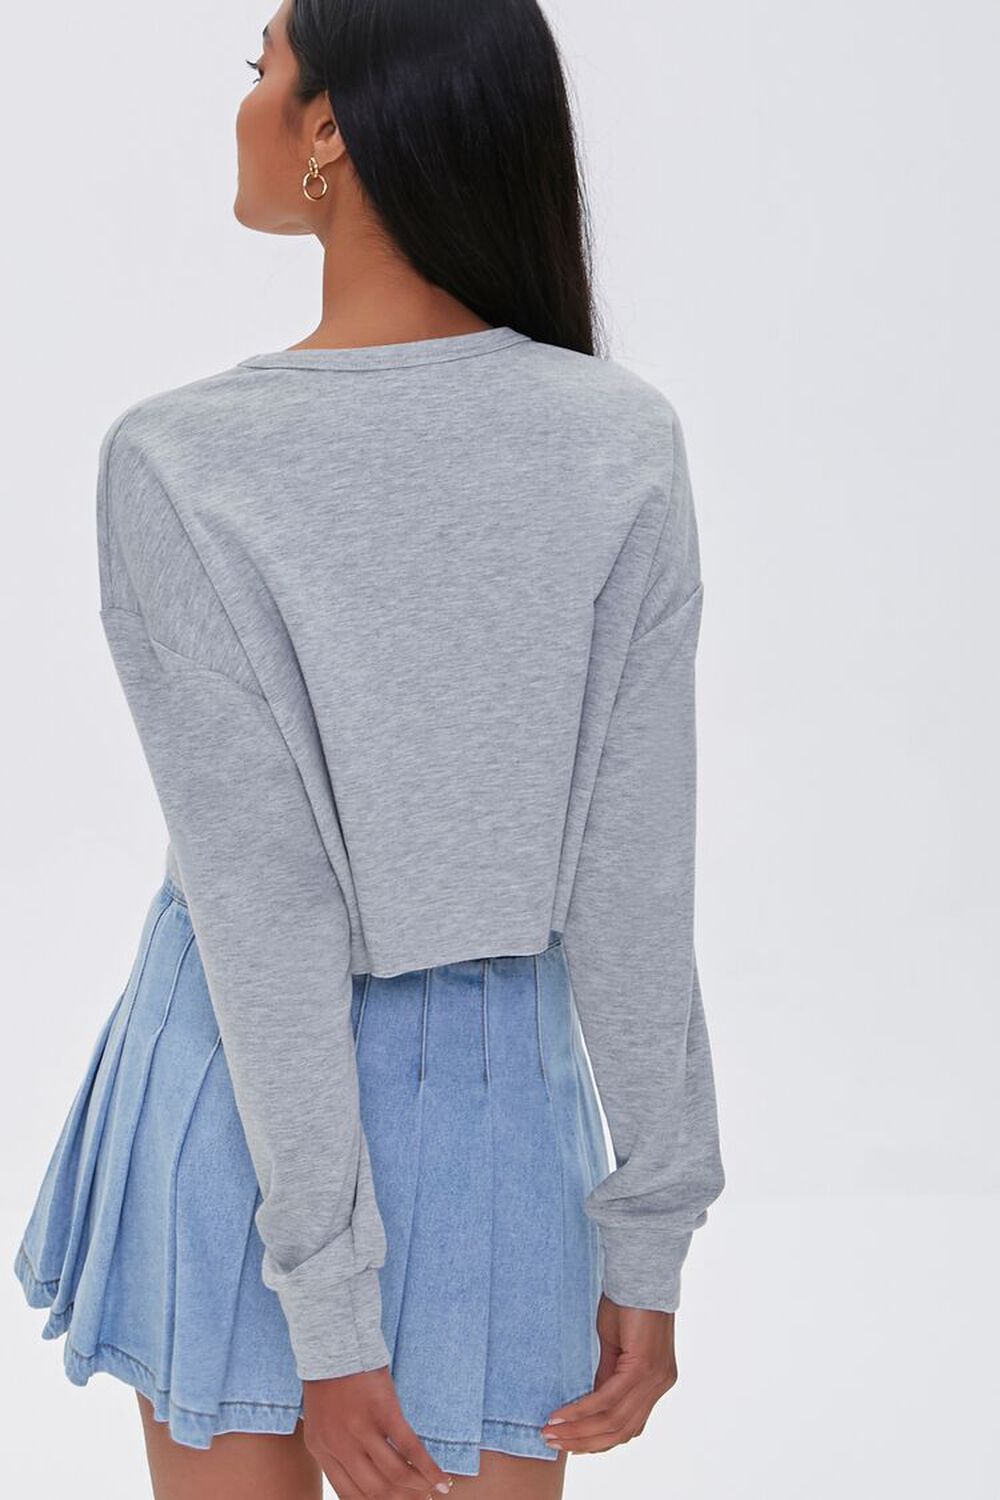 HEATHER GREY Cropped French Terry Top, image 3